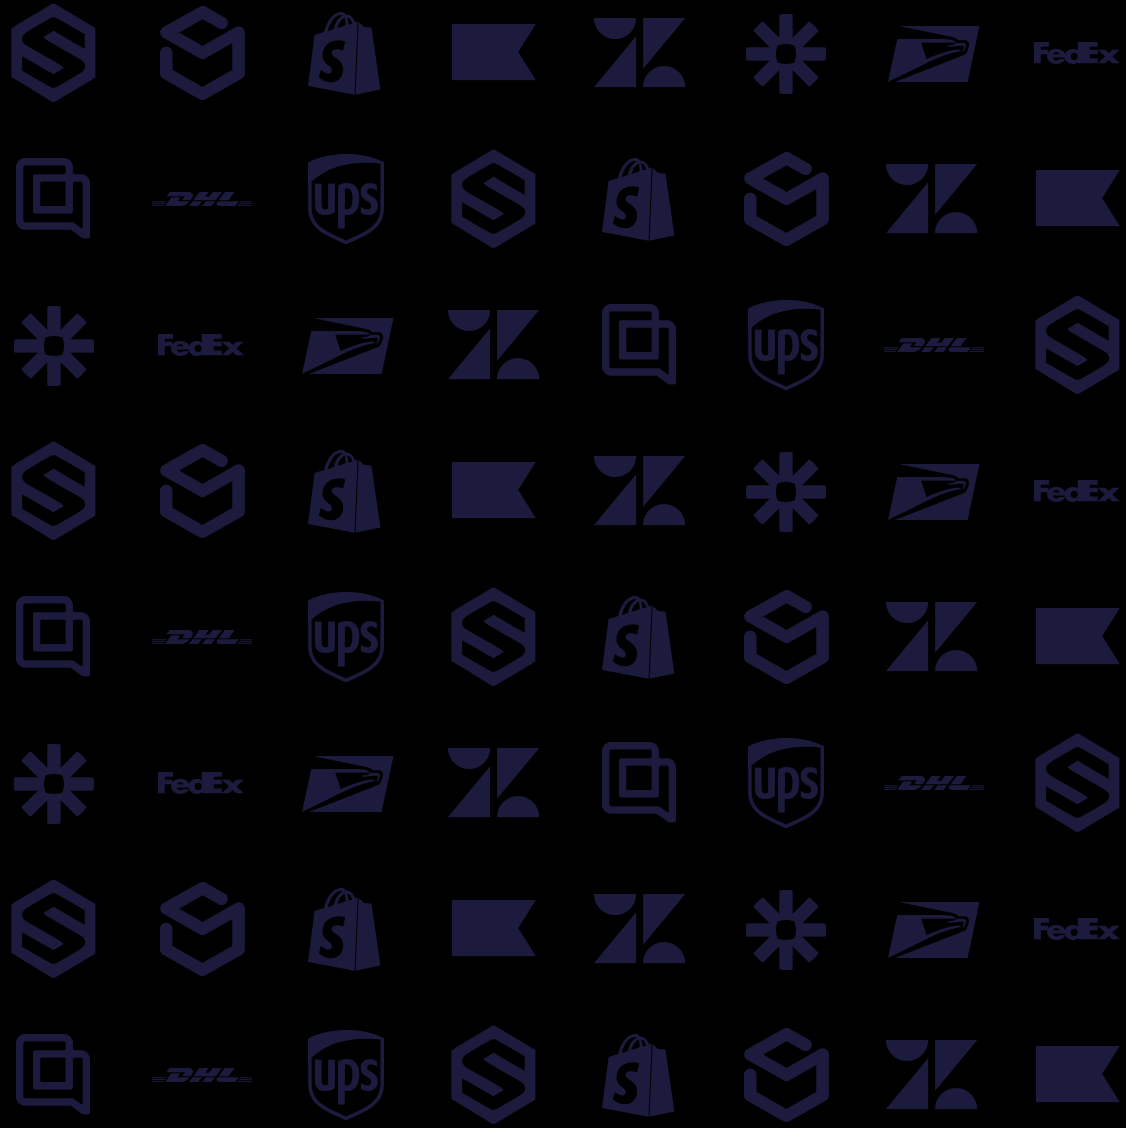 extensibility icons